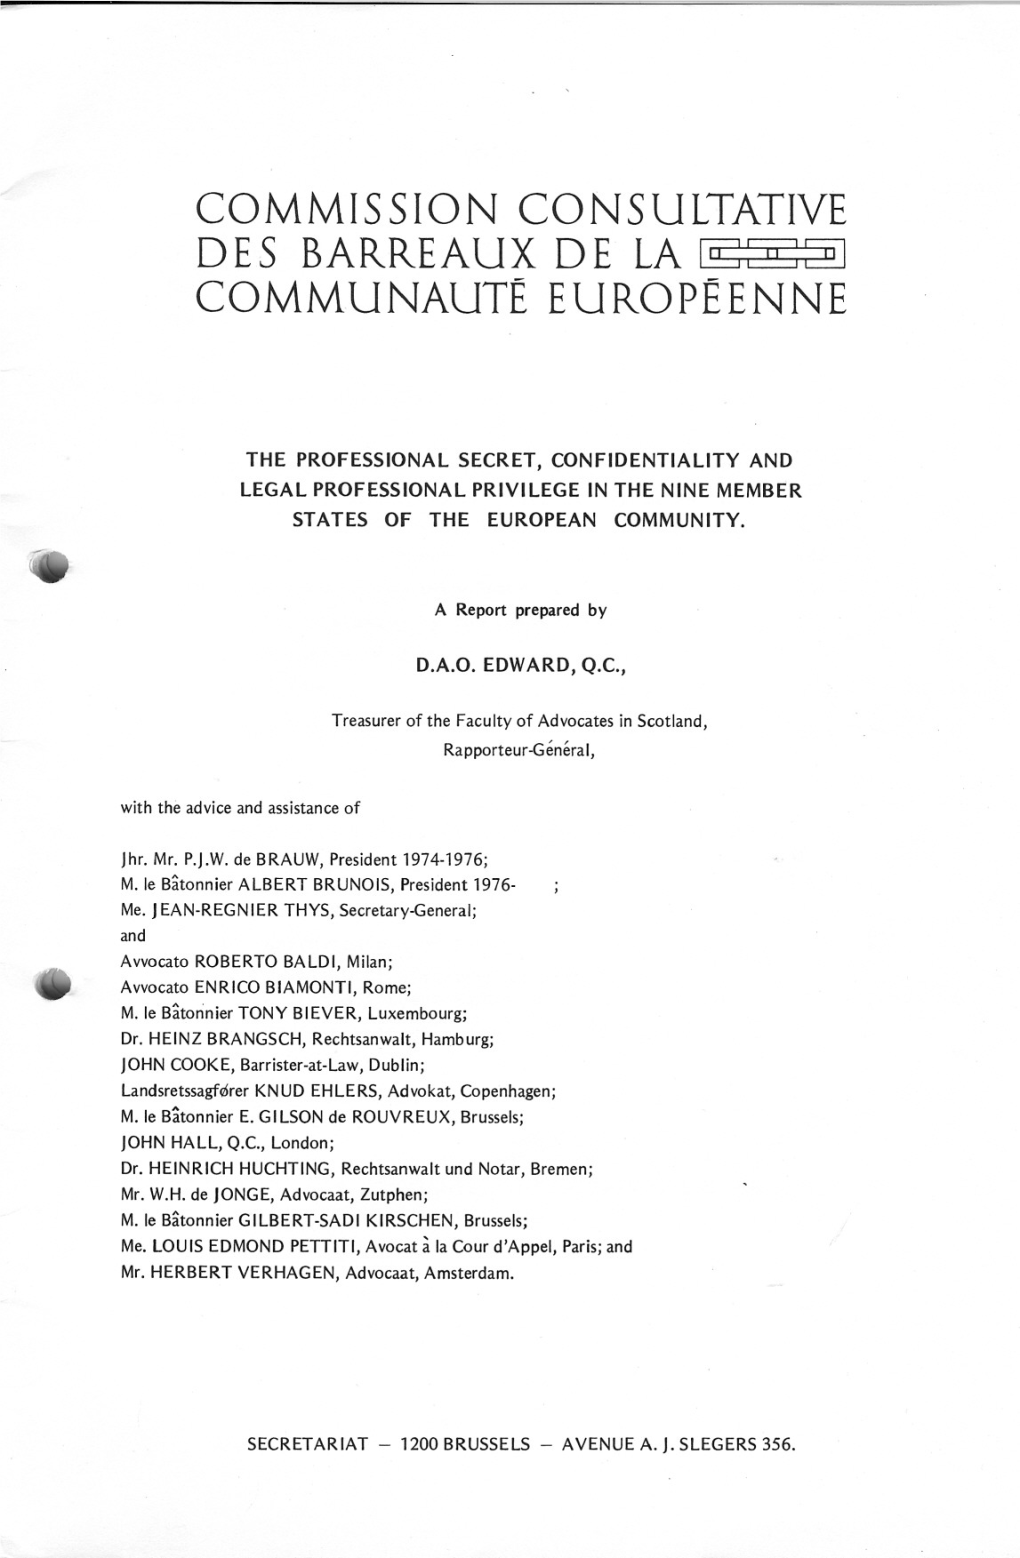 The Professional Secret, Confidentiality and Legal Professional Privilege in the Nine Member States of the European Community